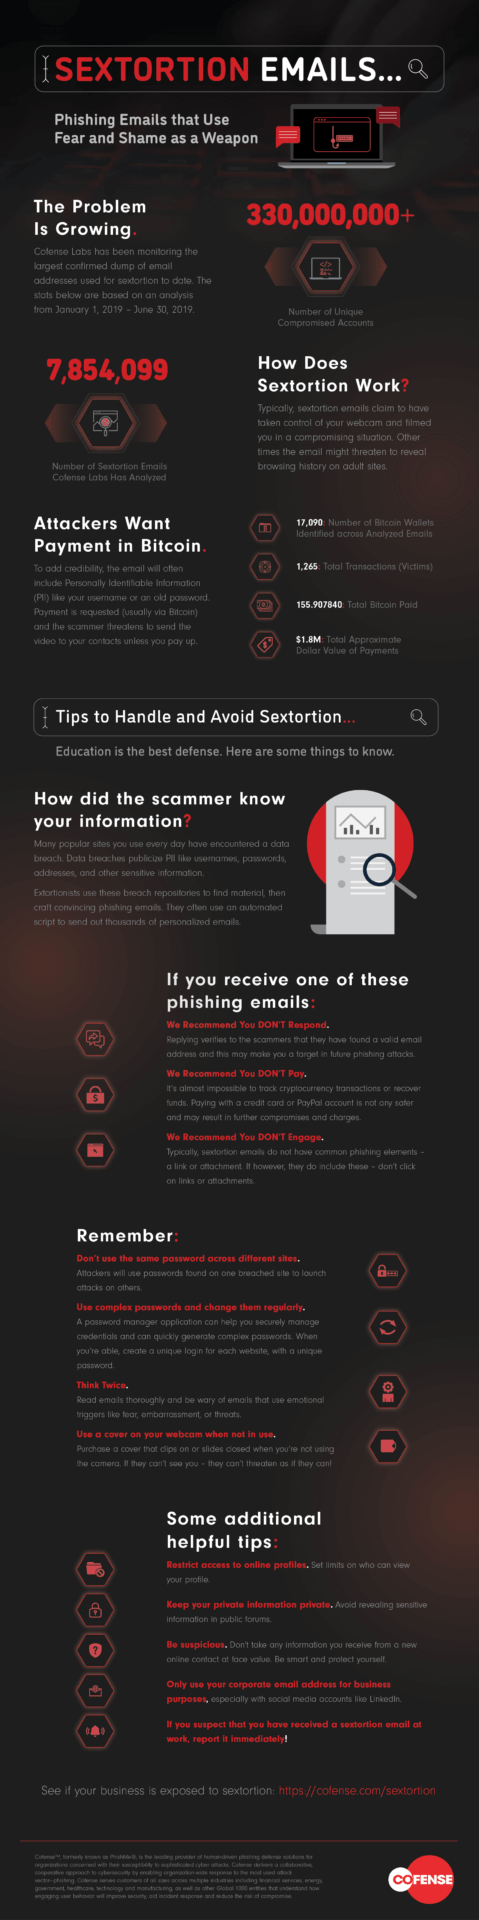 Sextortion: Protect Yourself from Online Scams - Infographic